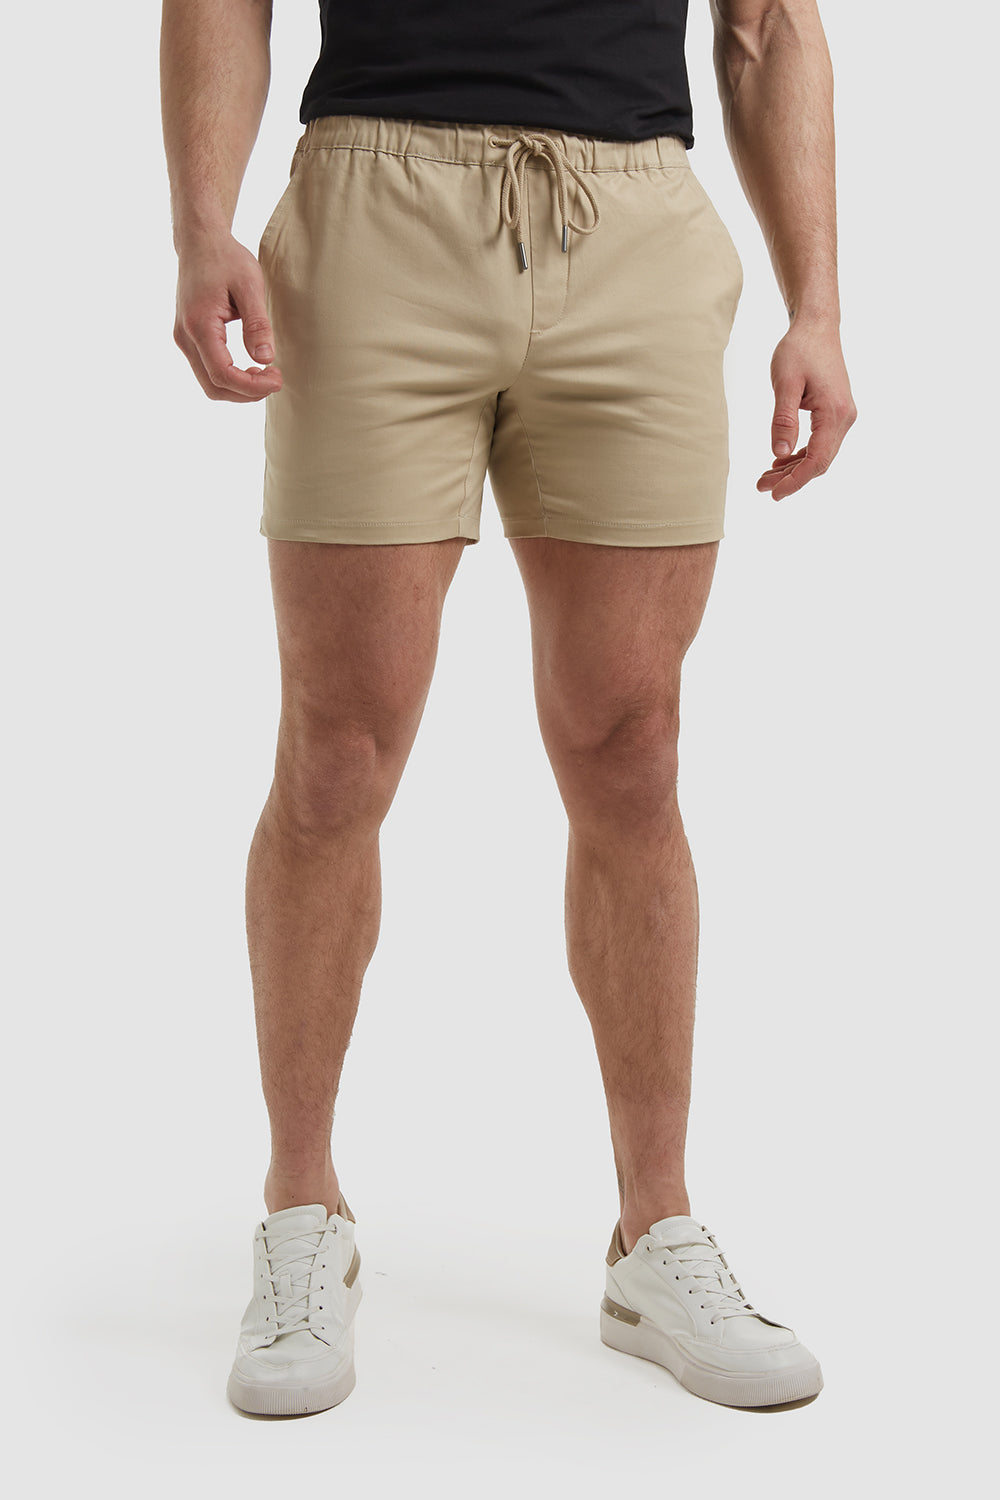 Muscle Fit Drawstring Chino Shorts in Stone - TAILORED ATHLETE - ROW